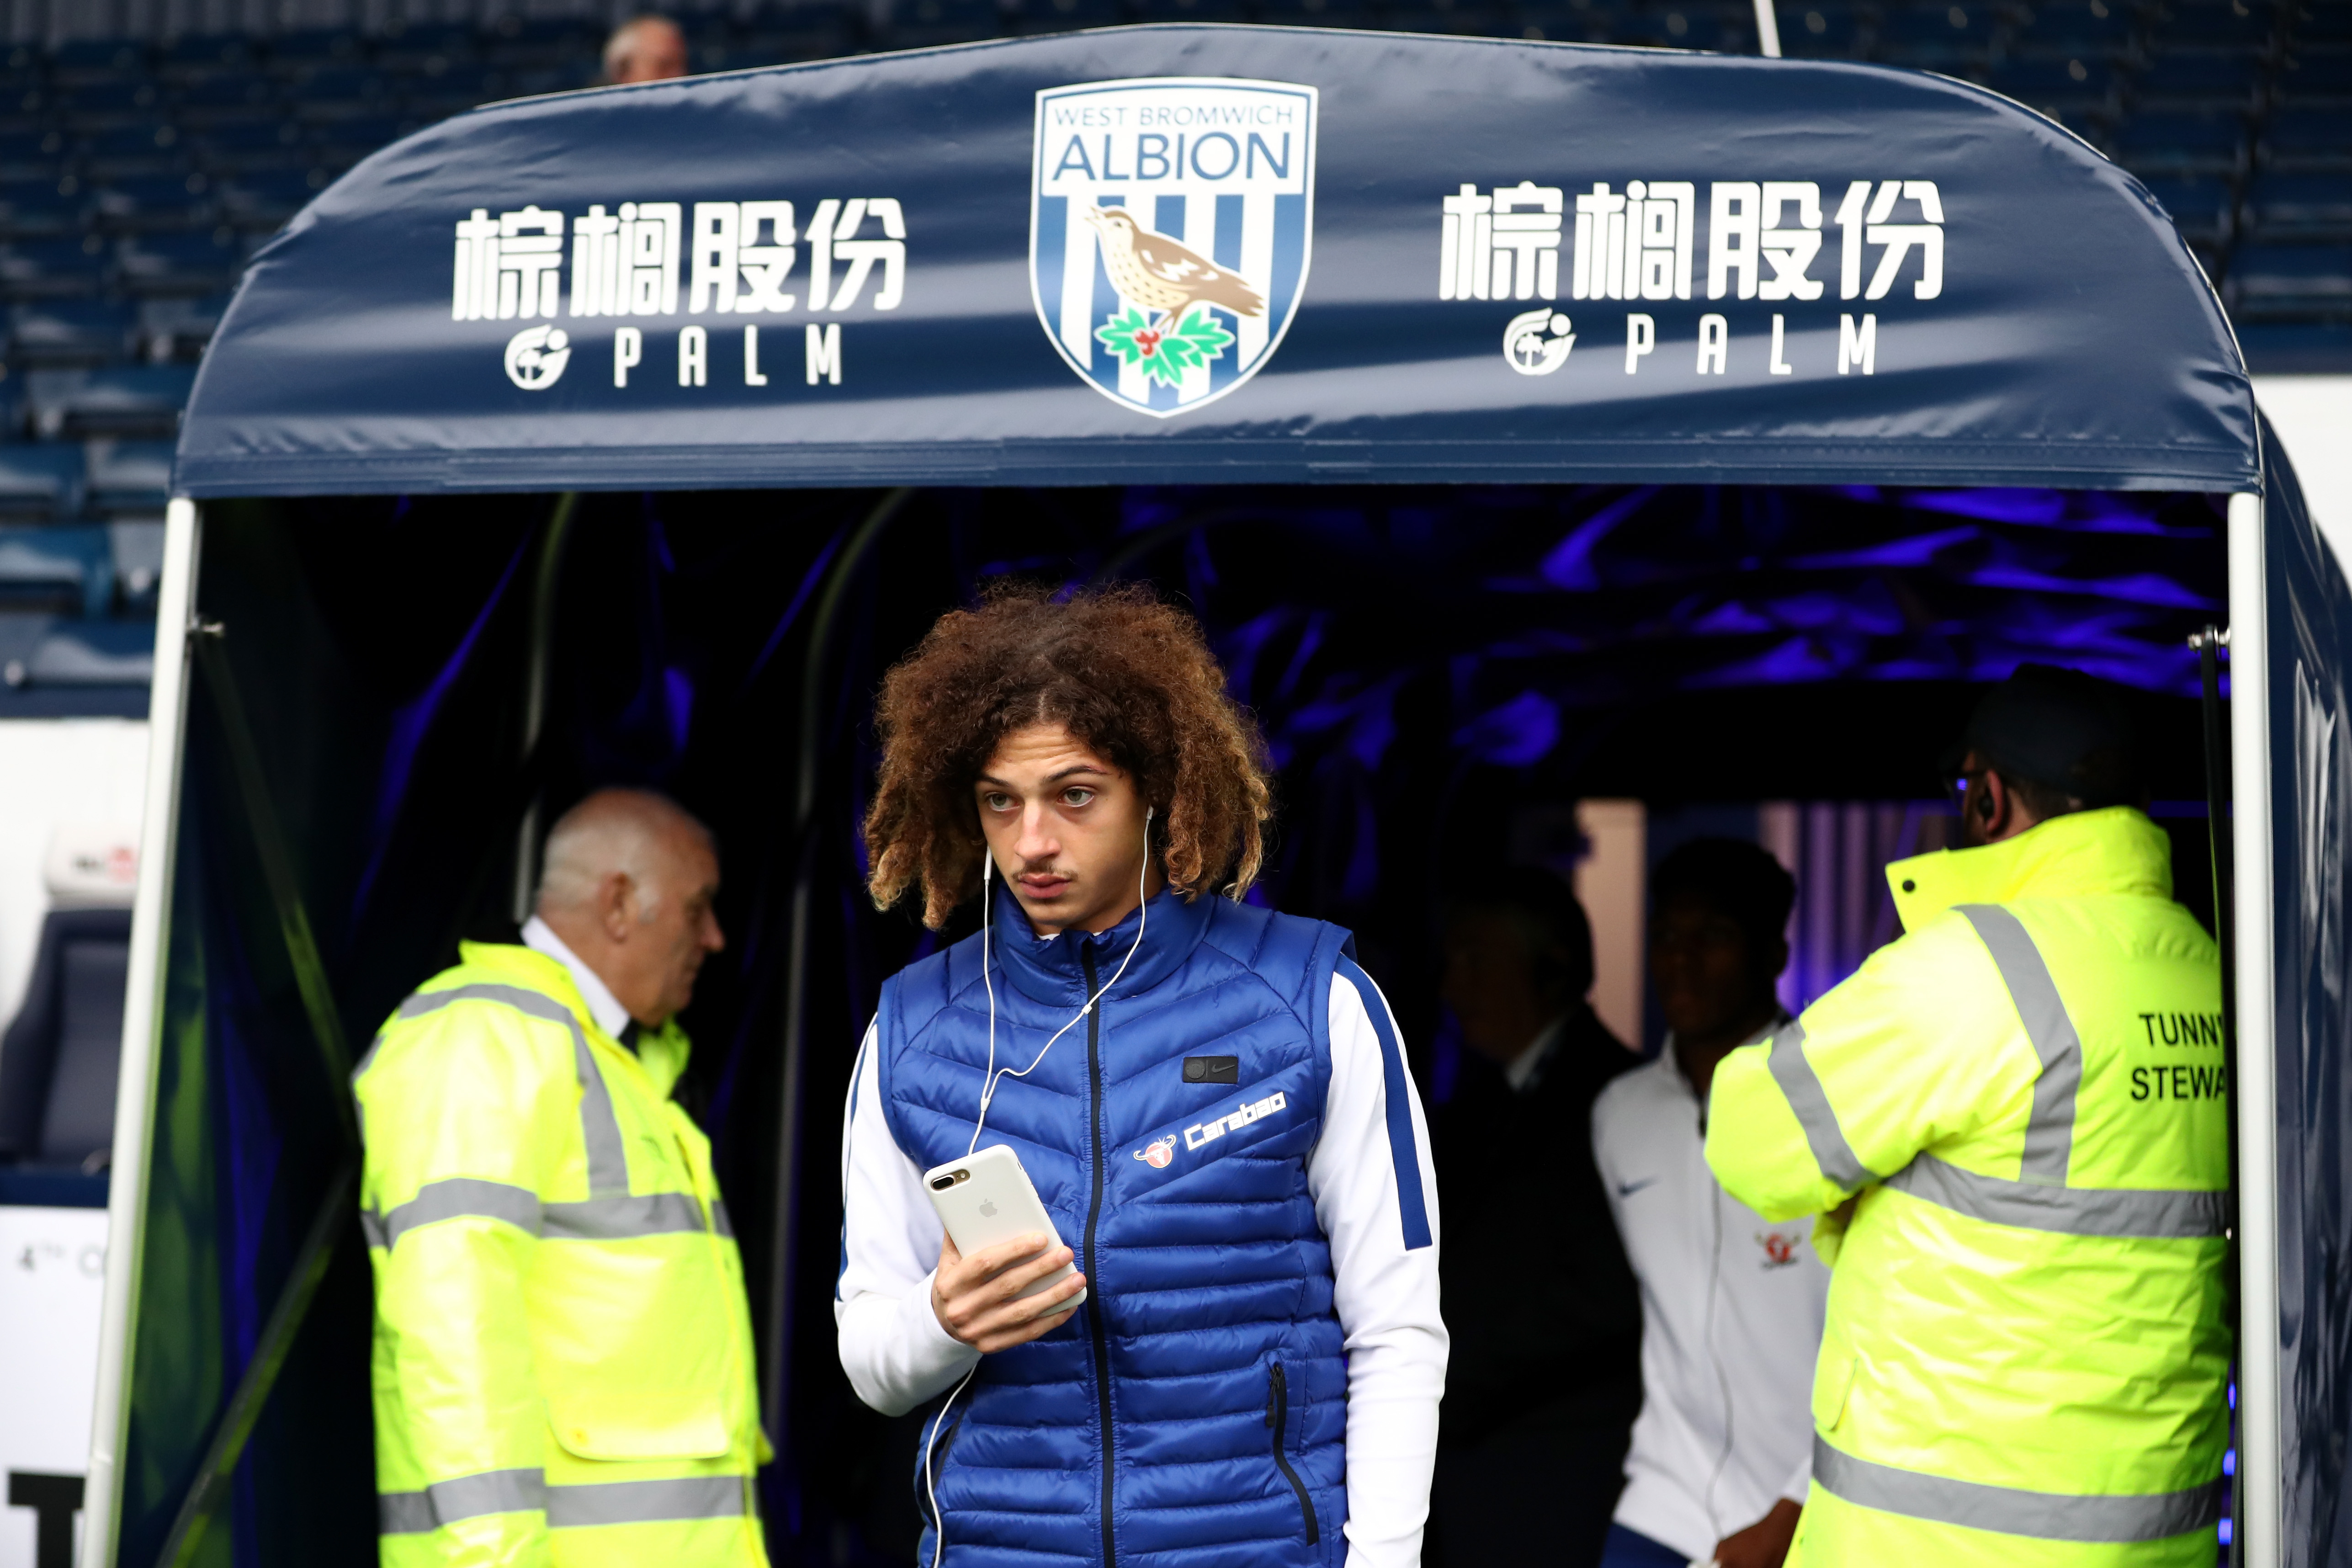 WEST BROMWICH, ENGLAND - NOVEMBER 18:  Ethan Ampadu of Chelsea prior to the Premier League match between West Bromwich Albion and Chelsea at The Hawthorns on November 18, 2017 in West Bromwich, England.  (Photo by Catherine Ivill/Getty Images)